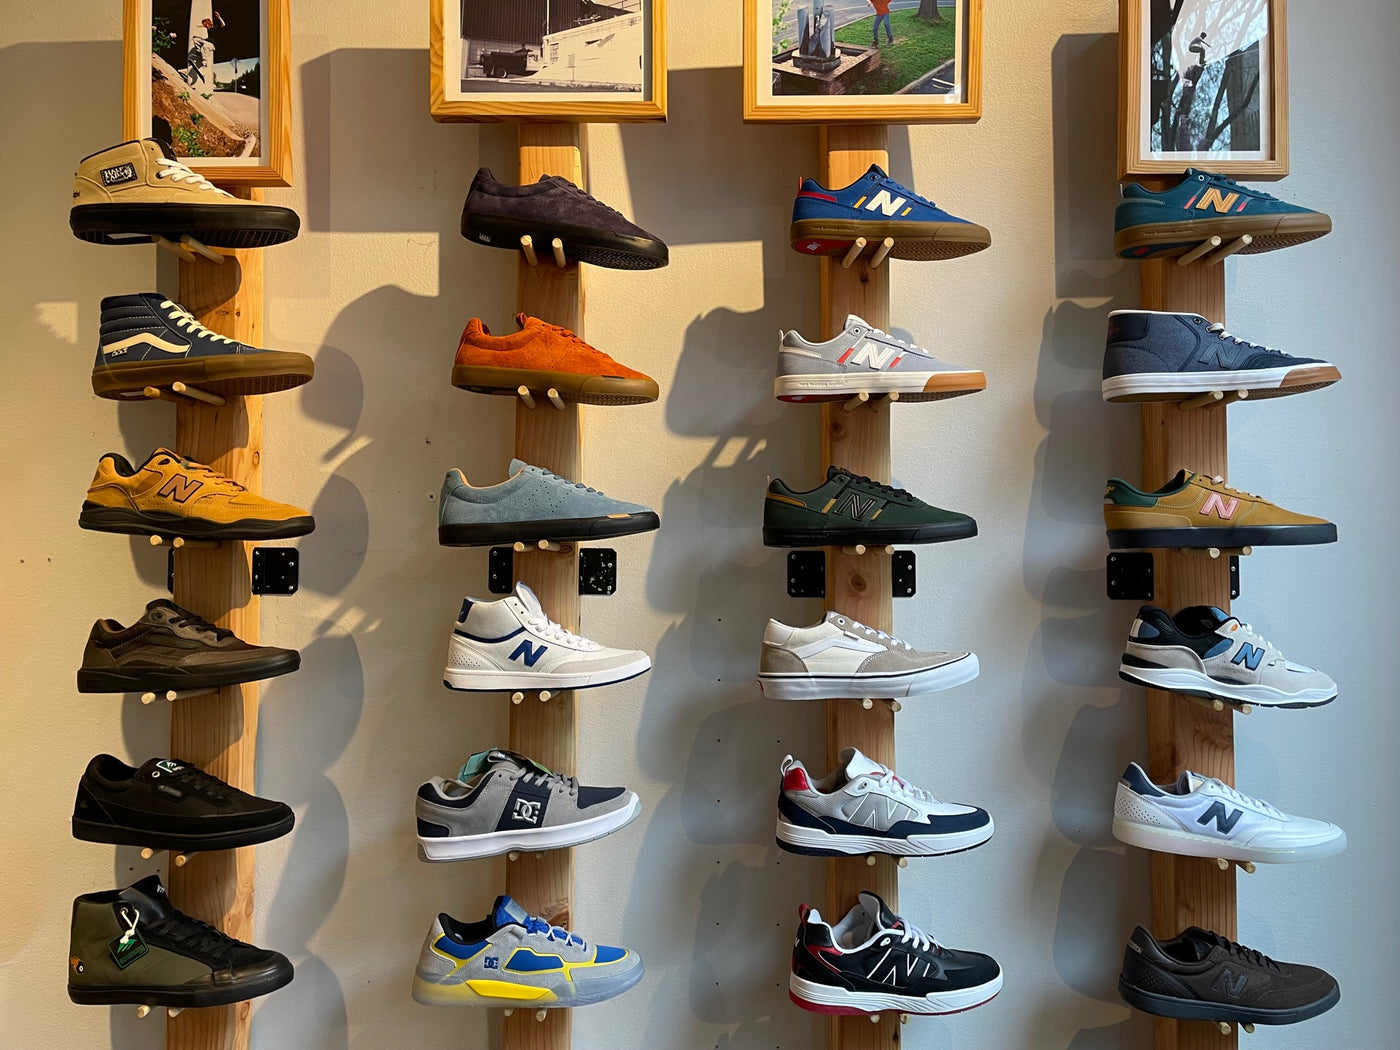 We carry New Balance and Emerica brand shoes. Come into our store located in Charlottesville, Virginia for more selection!